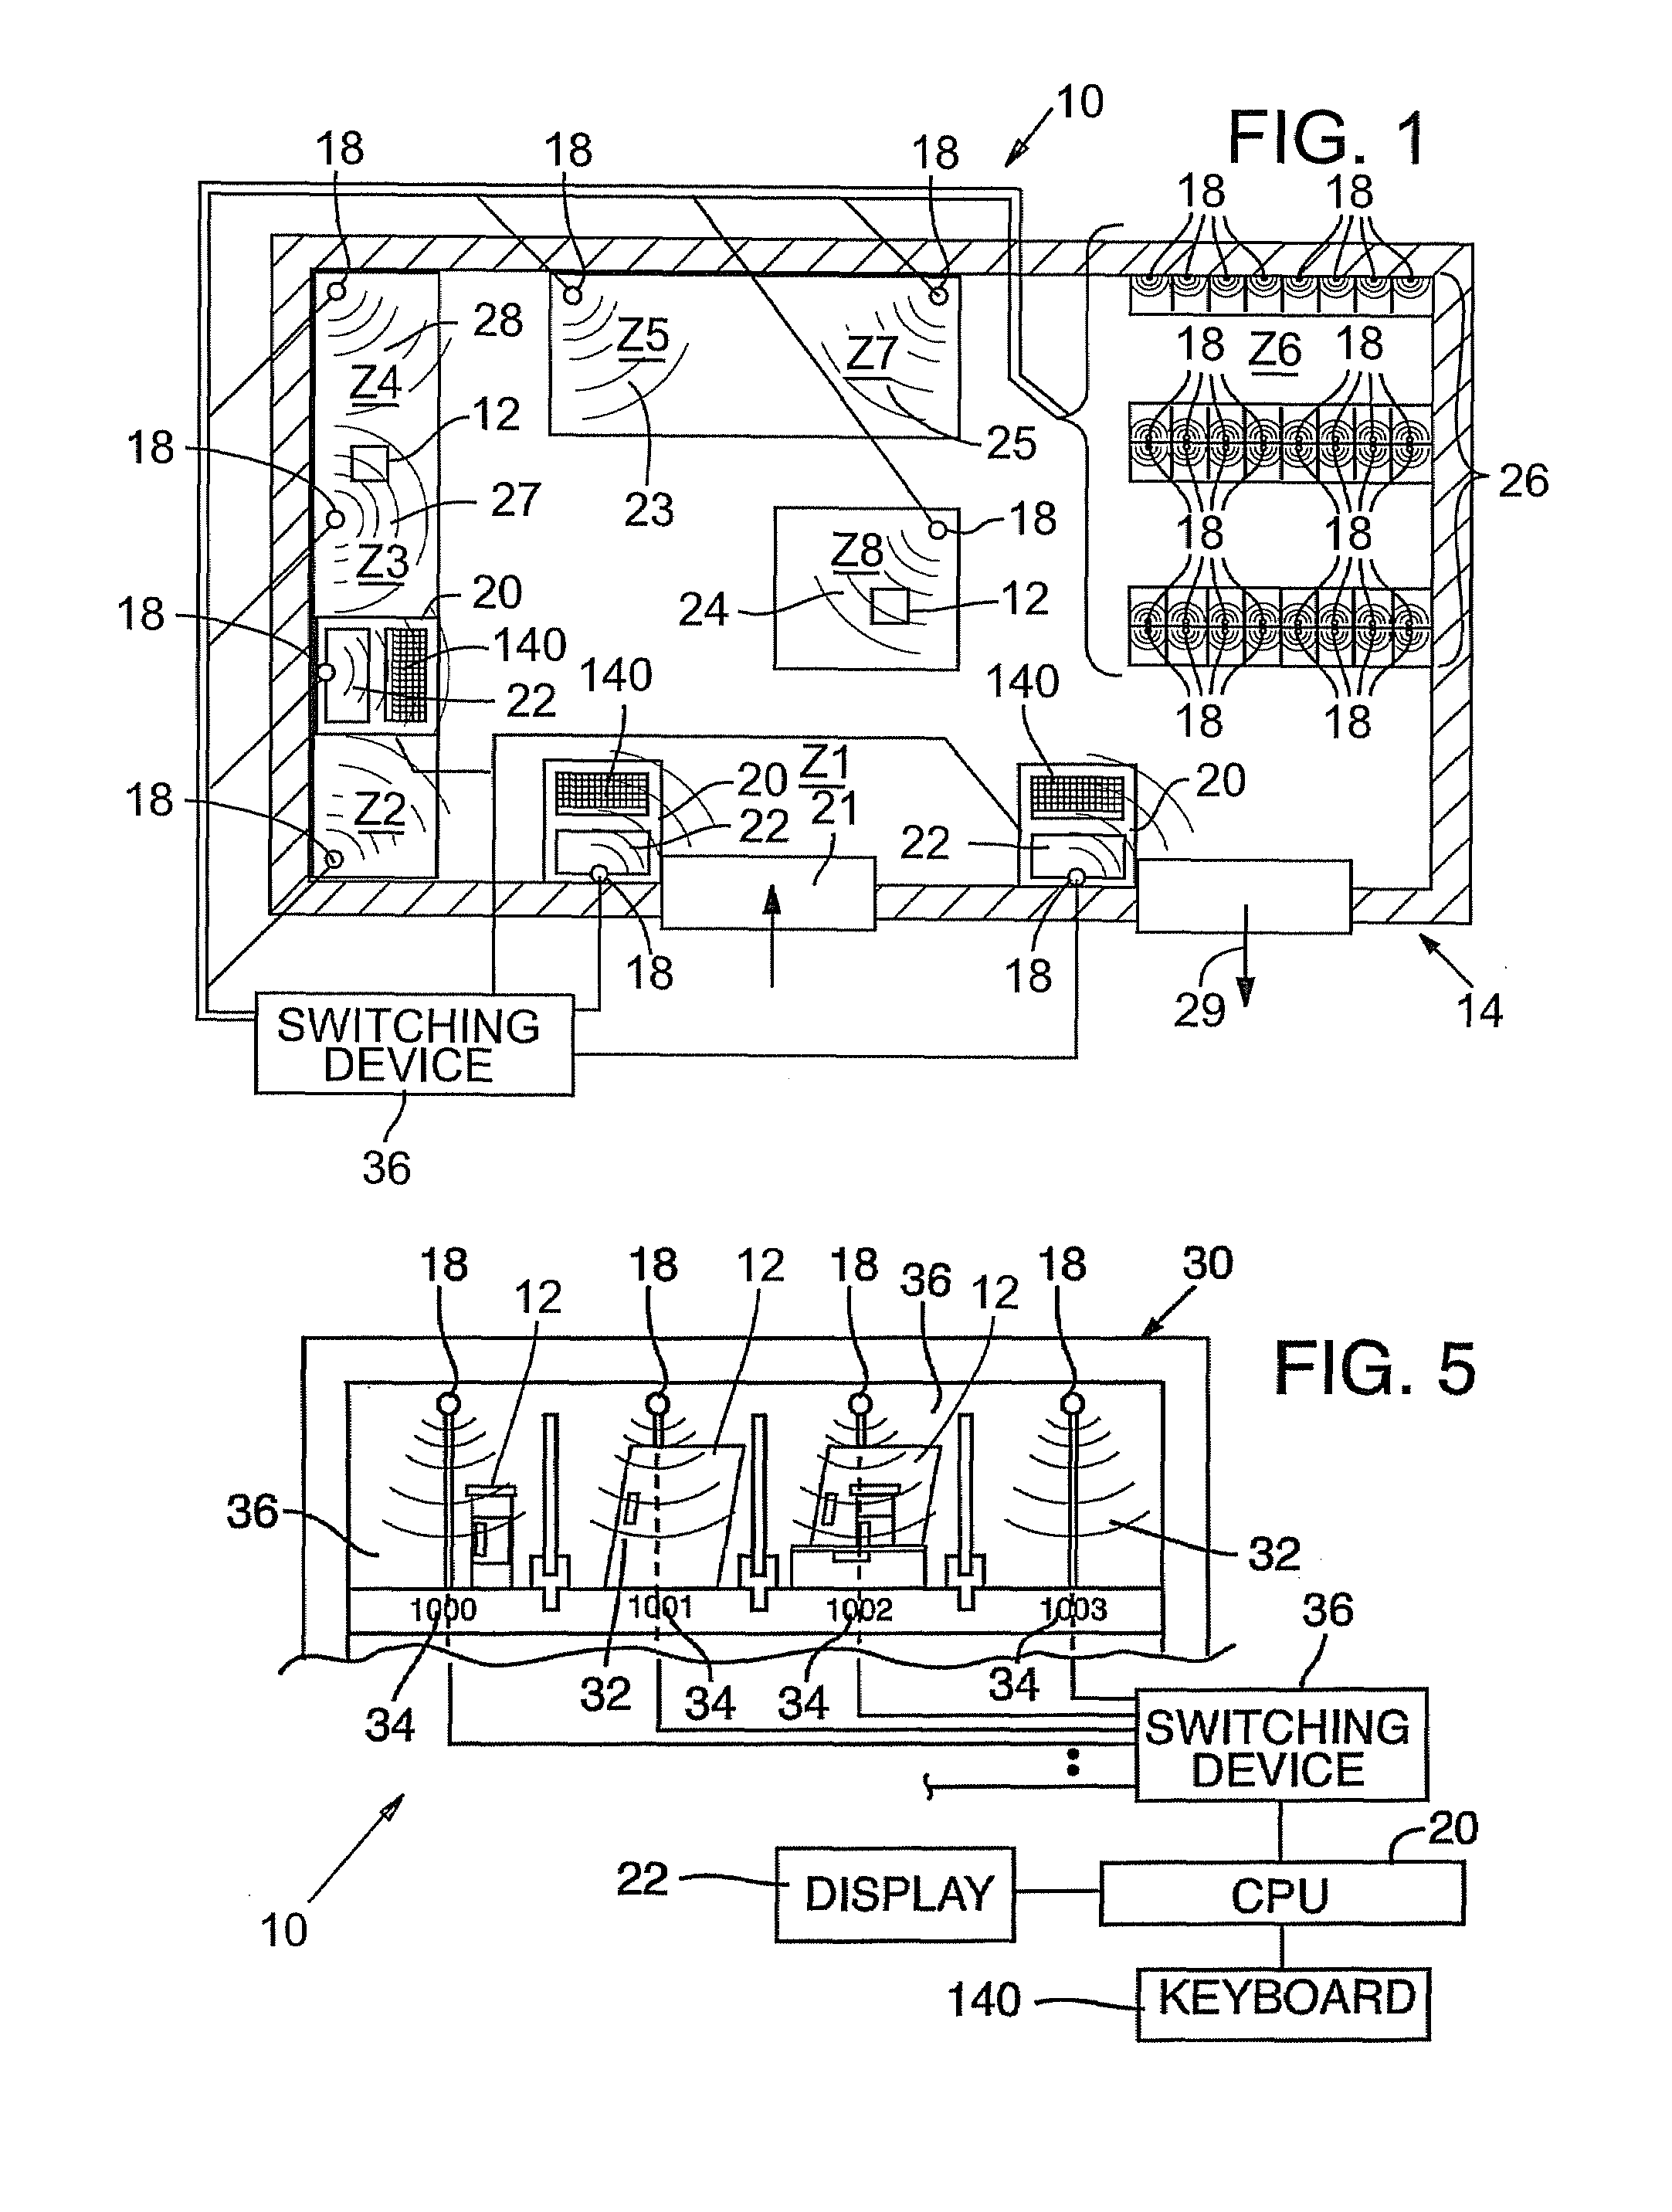 Prescription order position tracking system and method